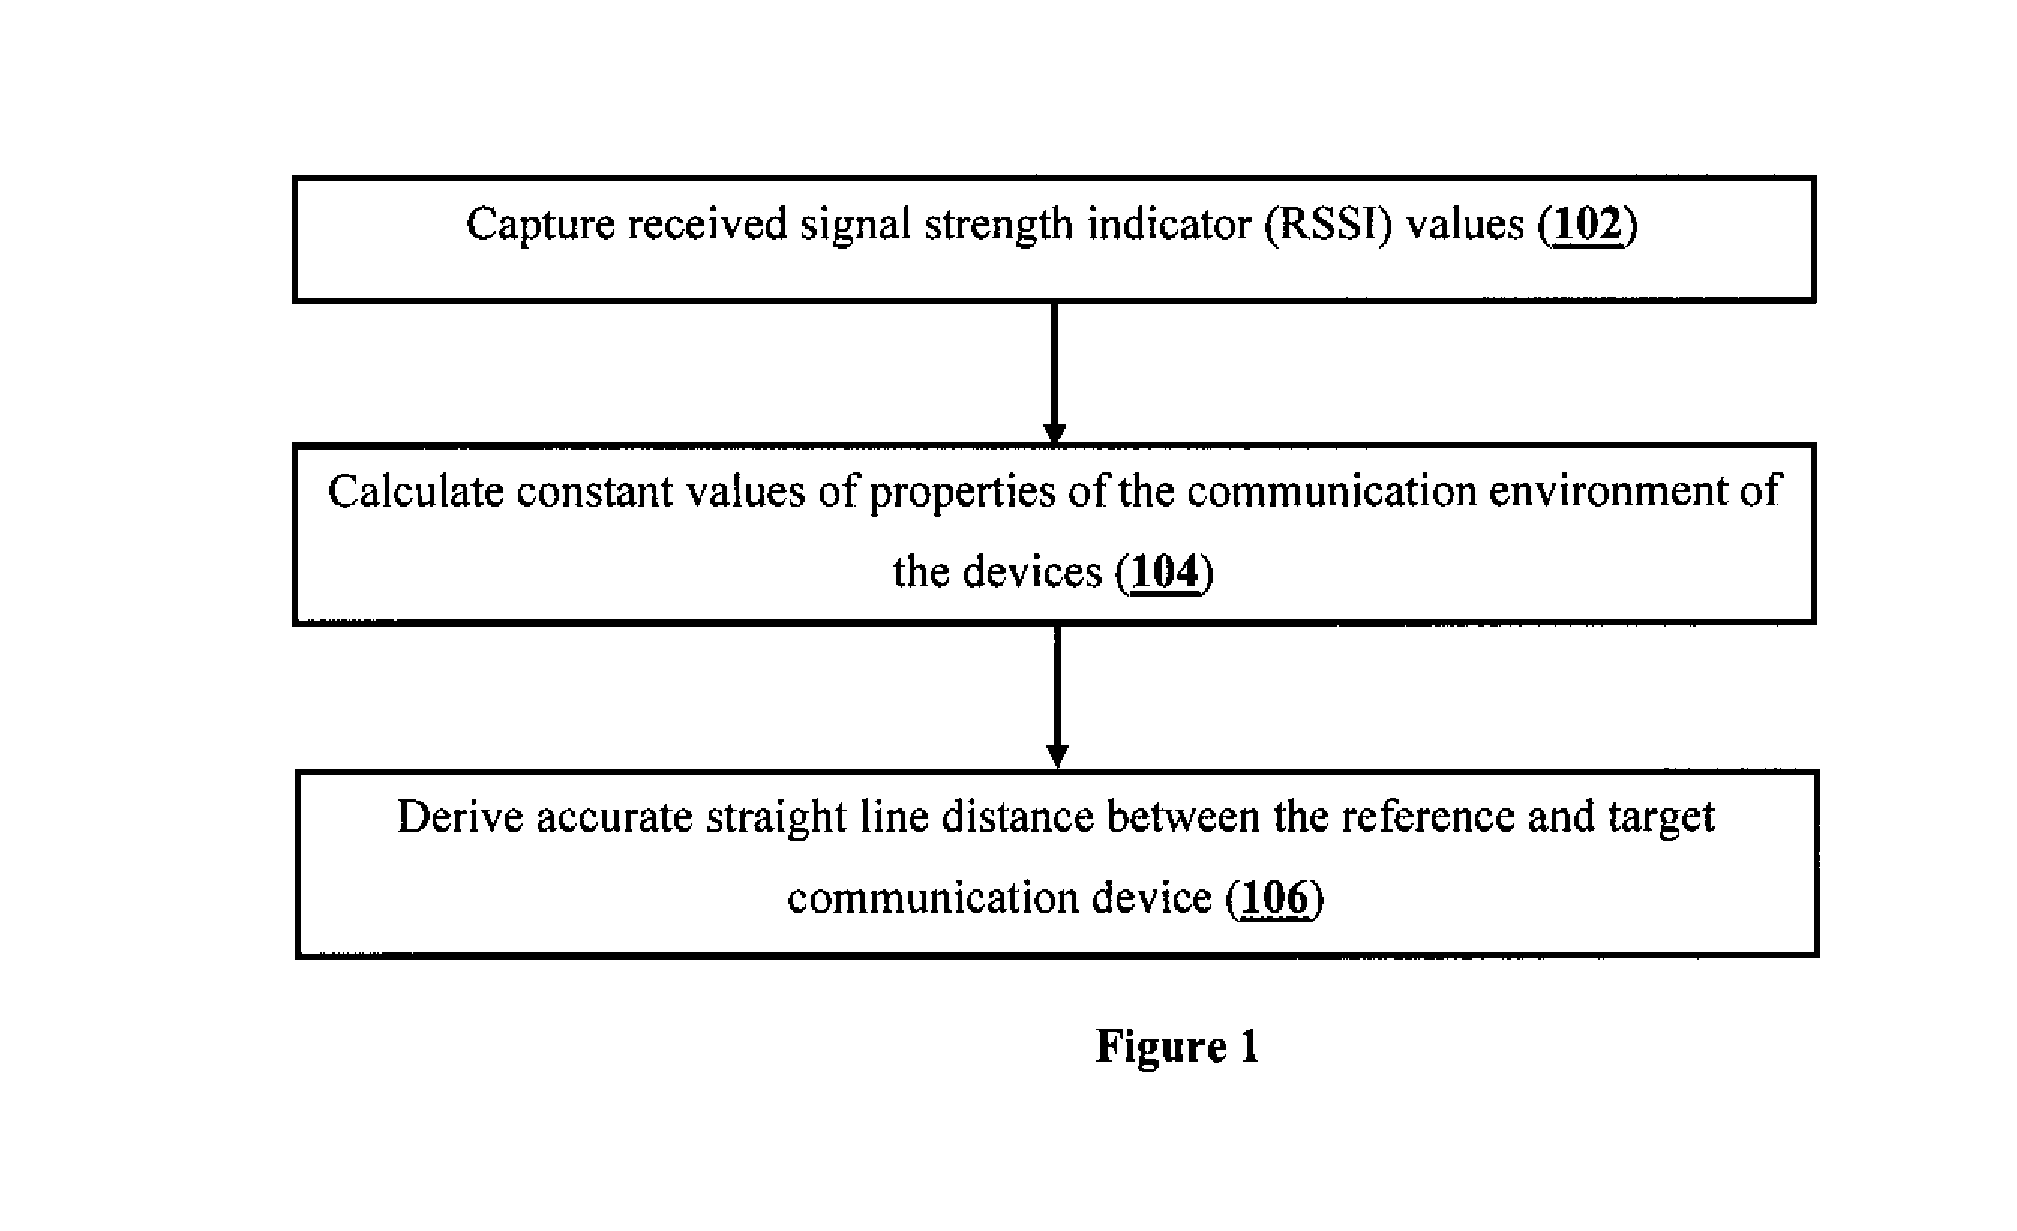 Method and System for Accurate Straight Line Distance Estimation Between Two Communication Devices